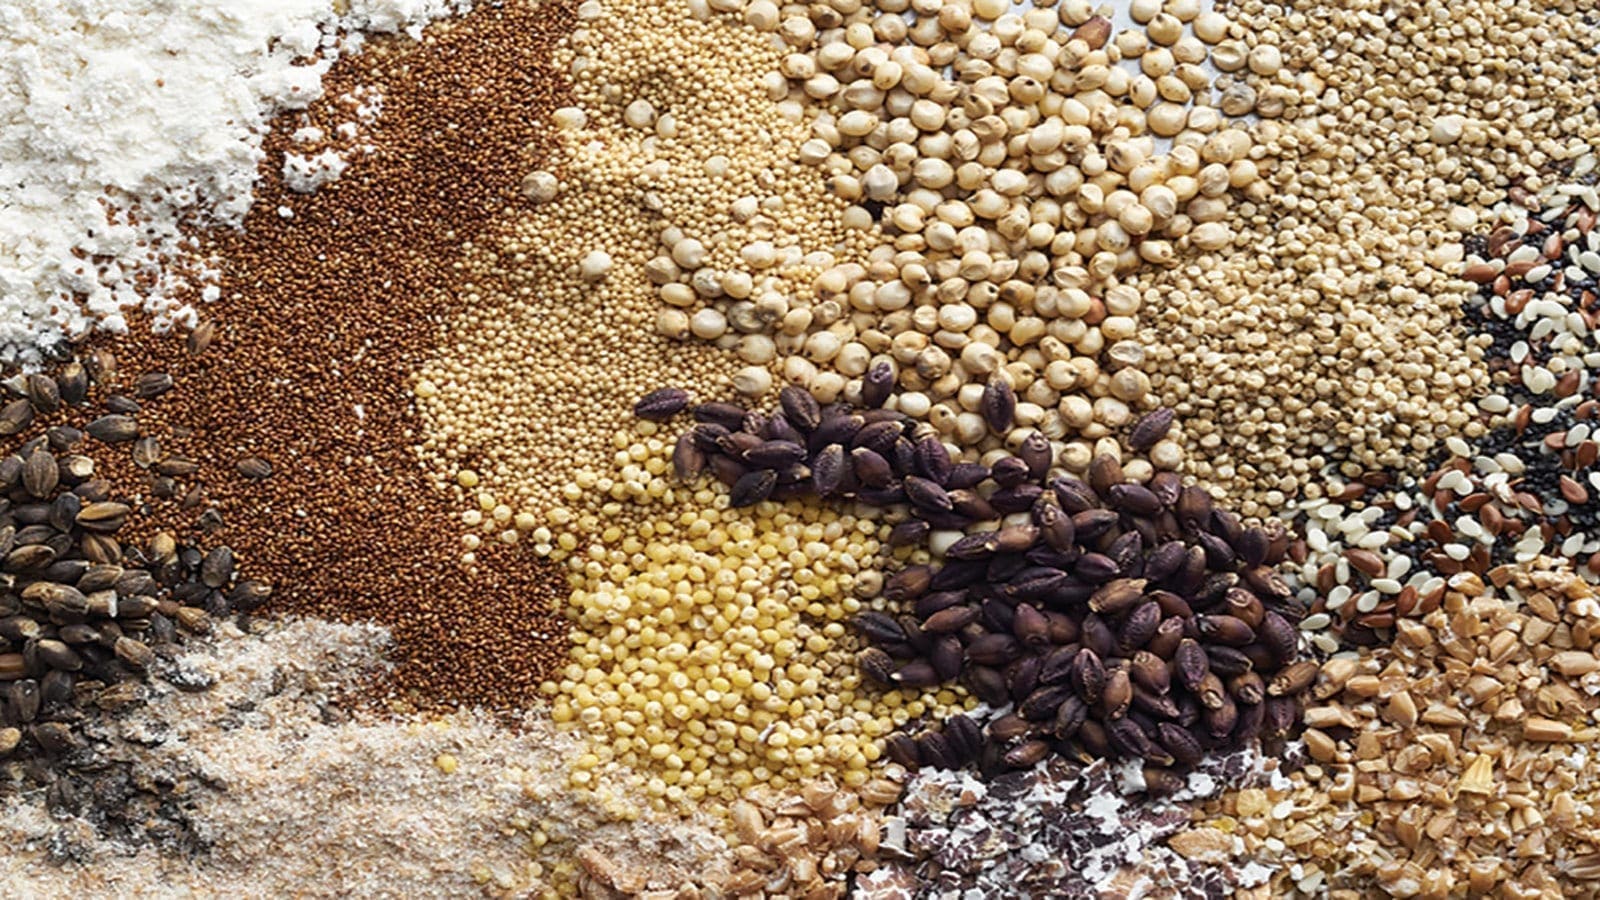 Food Corporation of India backs startups to develop grain-testing equipment